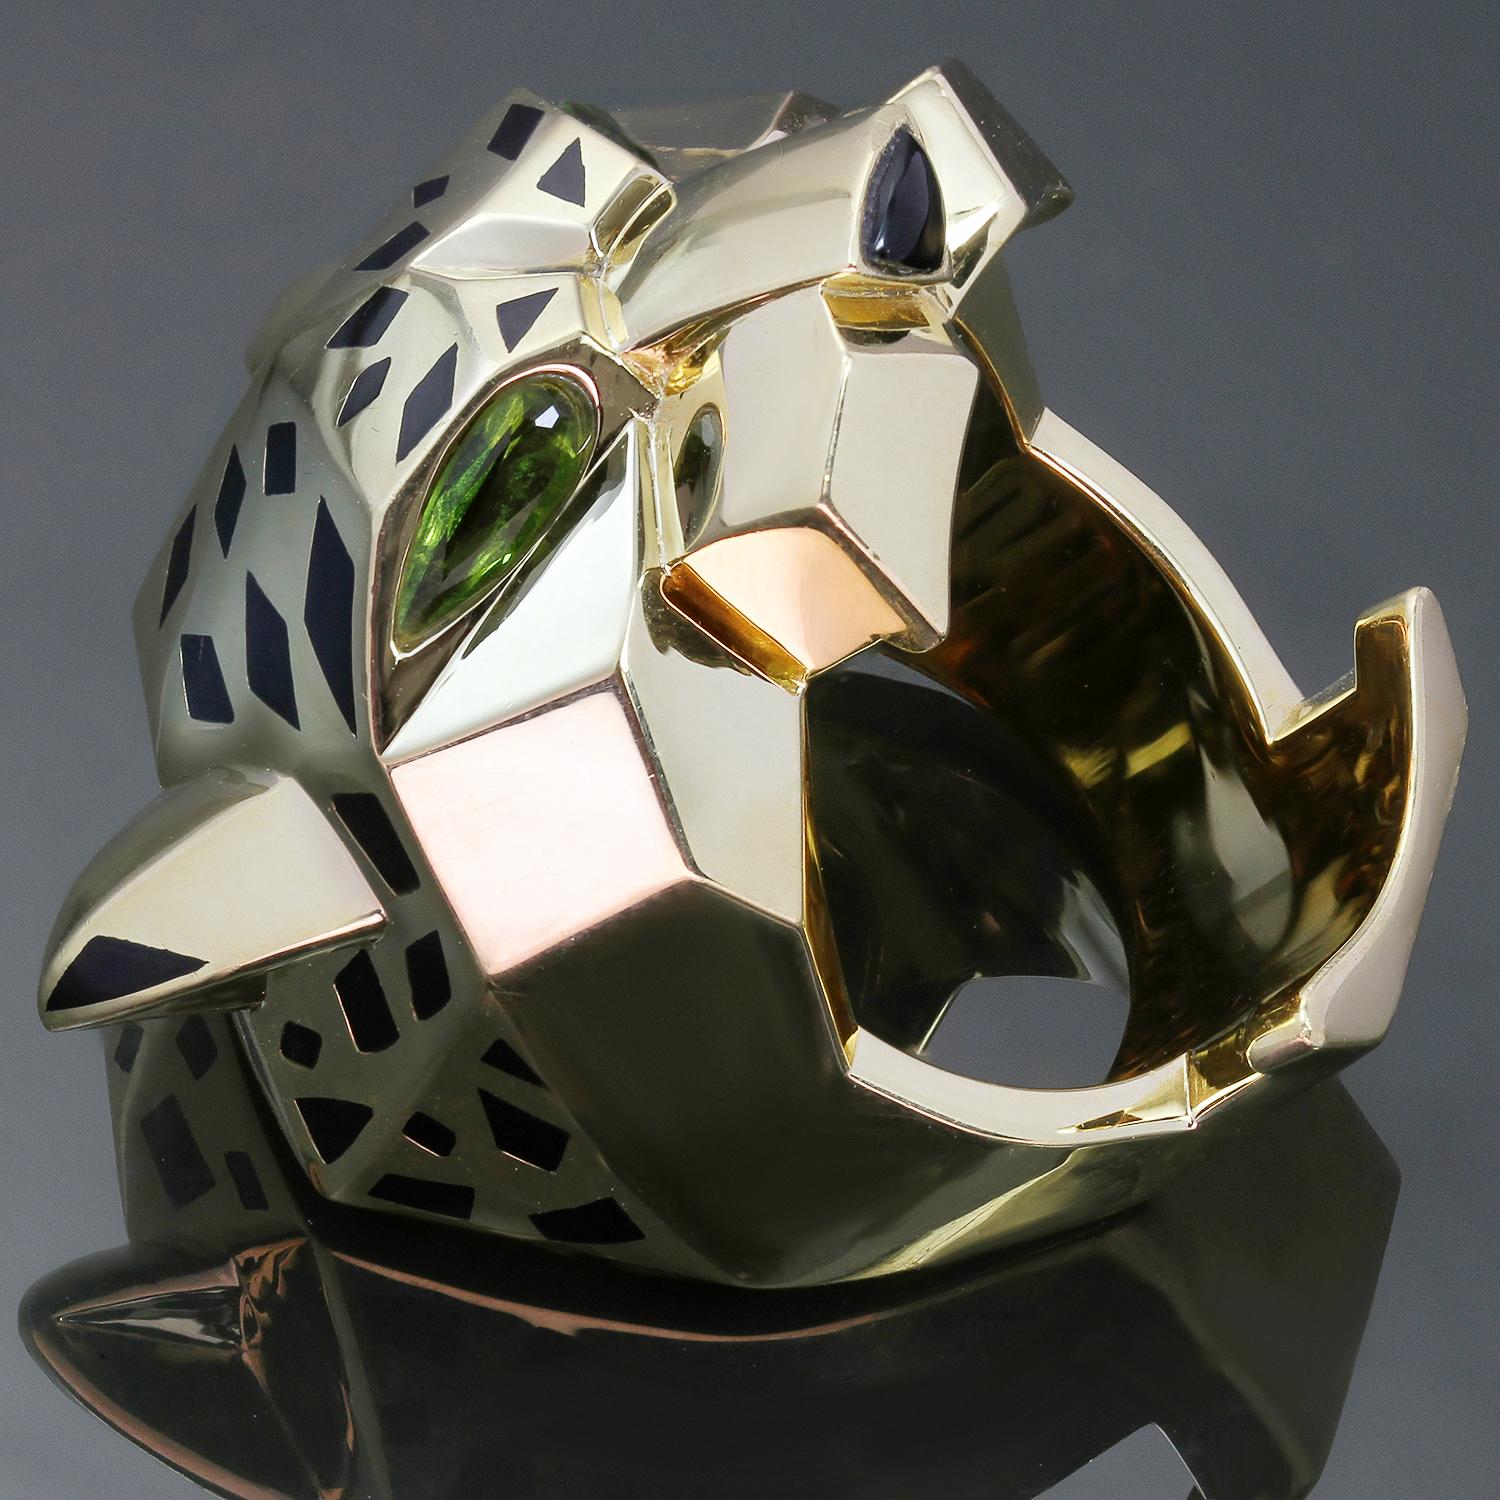 This gorgeous unisex Panthère de Cartier ring features a bold and fierce openwork panther design crafted in 18k yellow gold with black lacquer and accented with green peridot eyes and a black onyx nose. The ring comes with Cartier valuation report